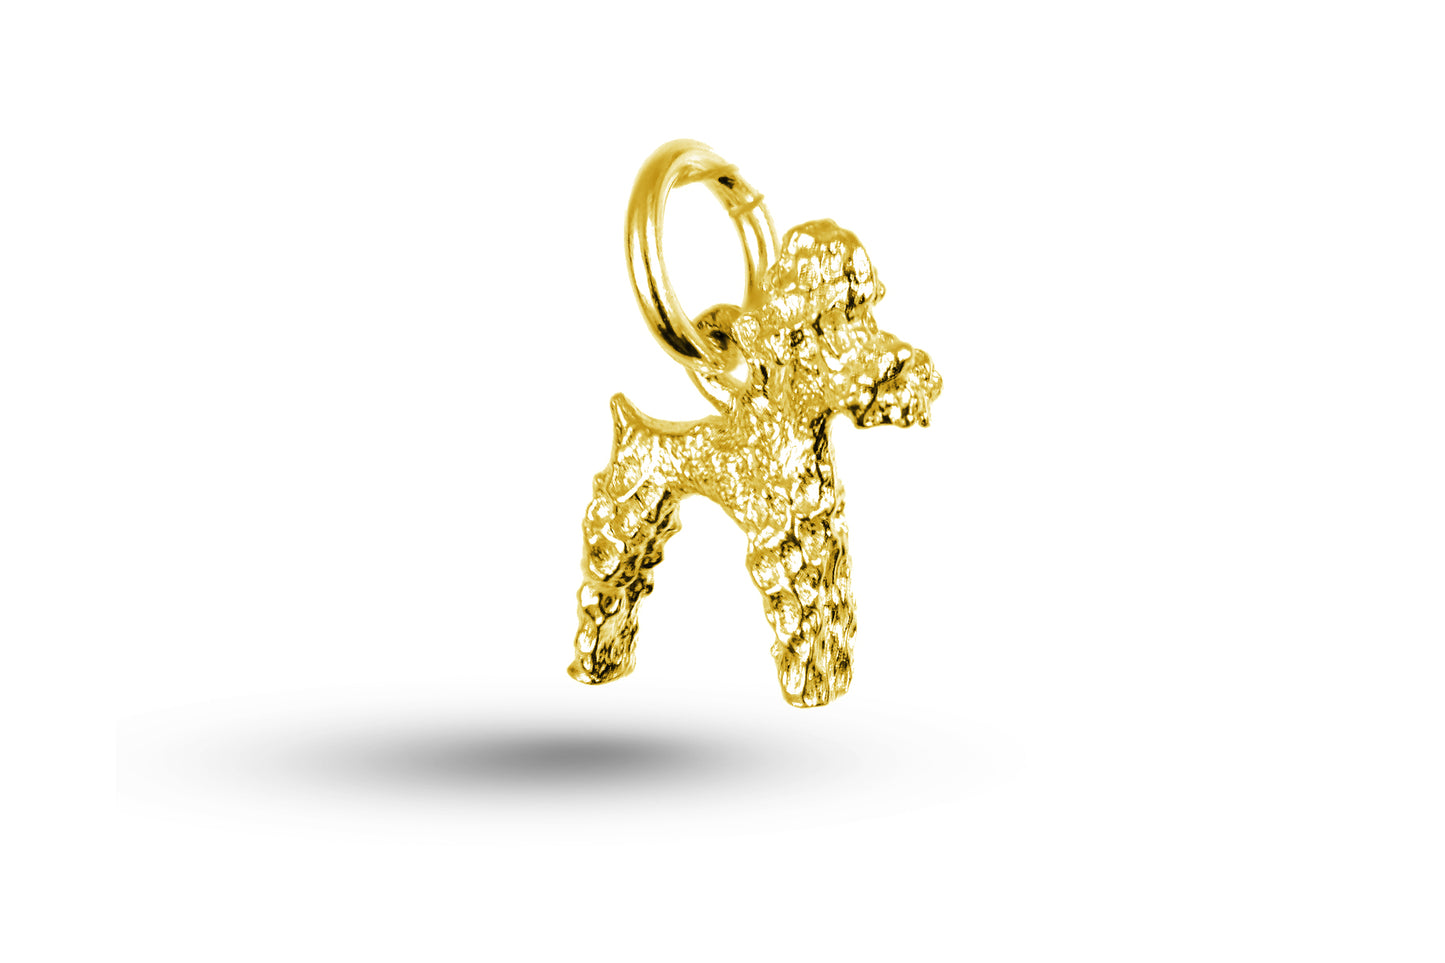 Yellow gold Poodle Dog charm.